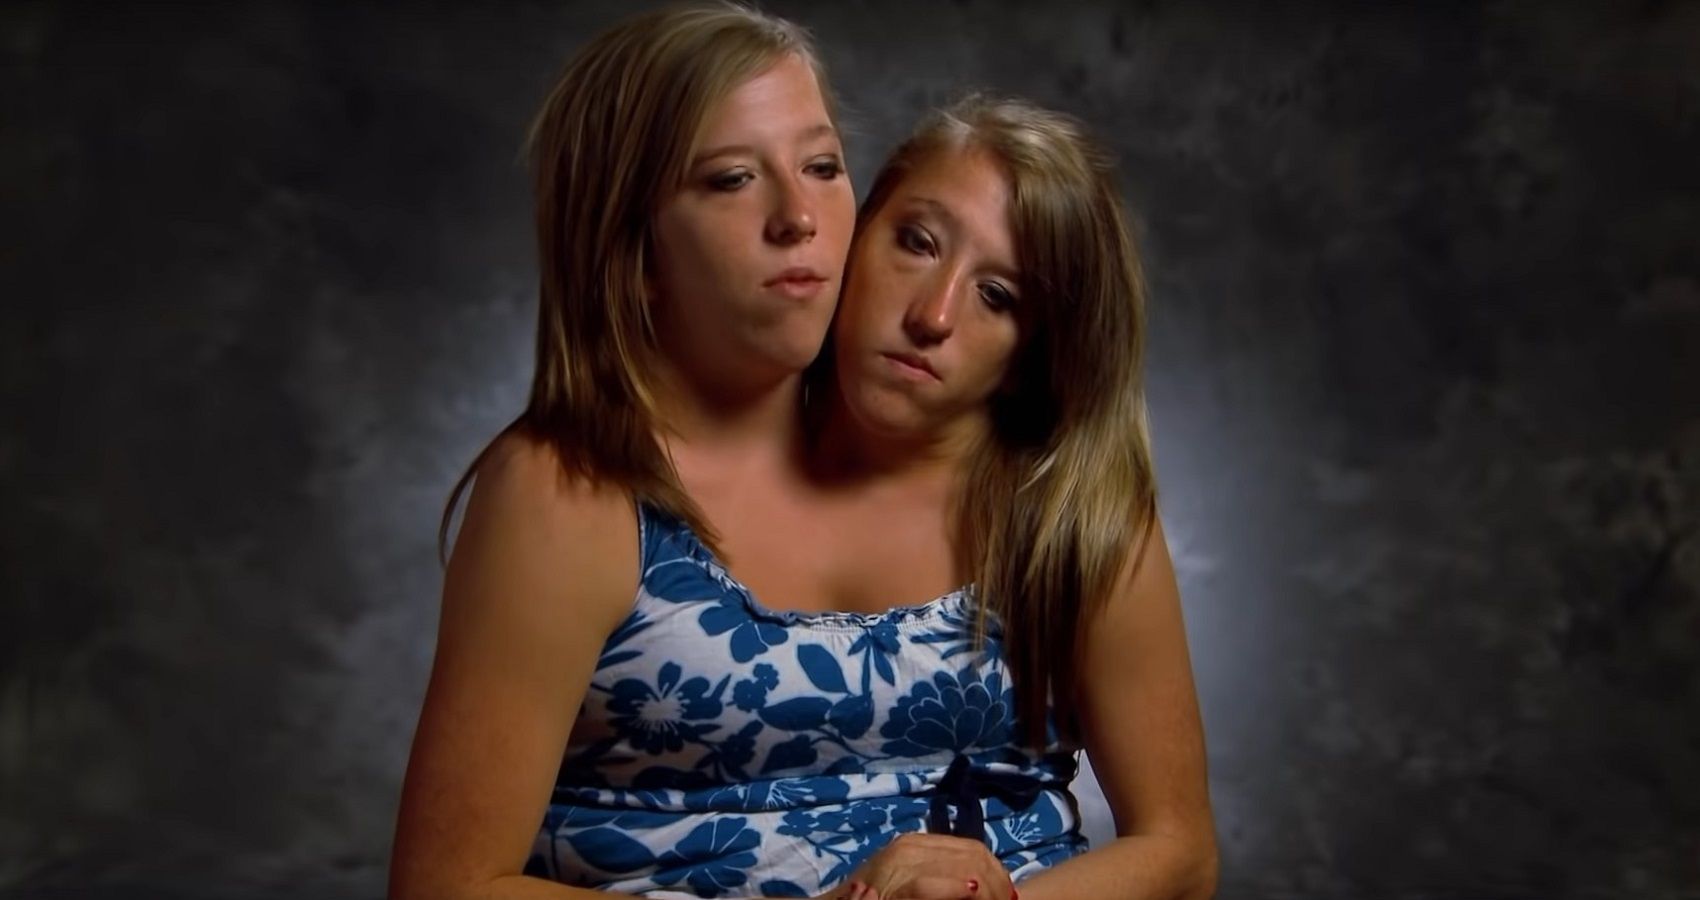 Inside Conjoined Twins Abby And Brittany's Mysterious Dating Life